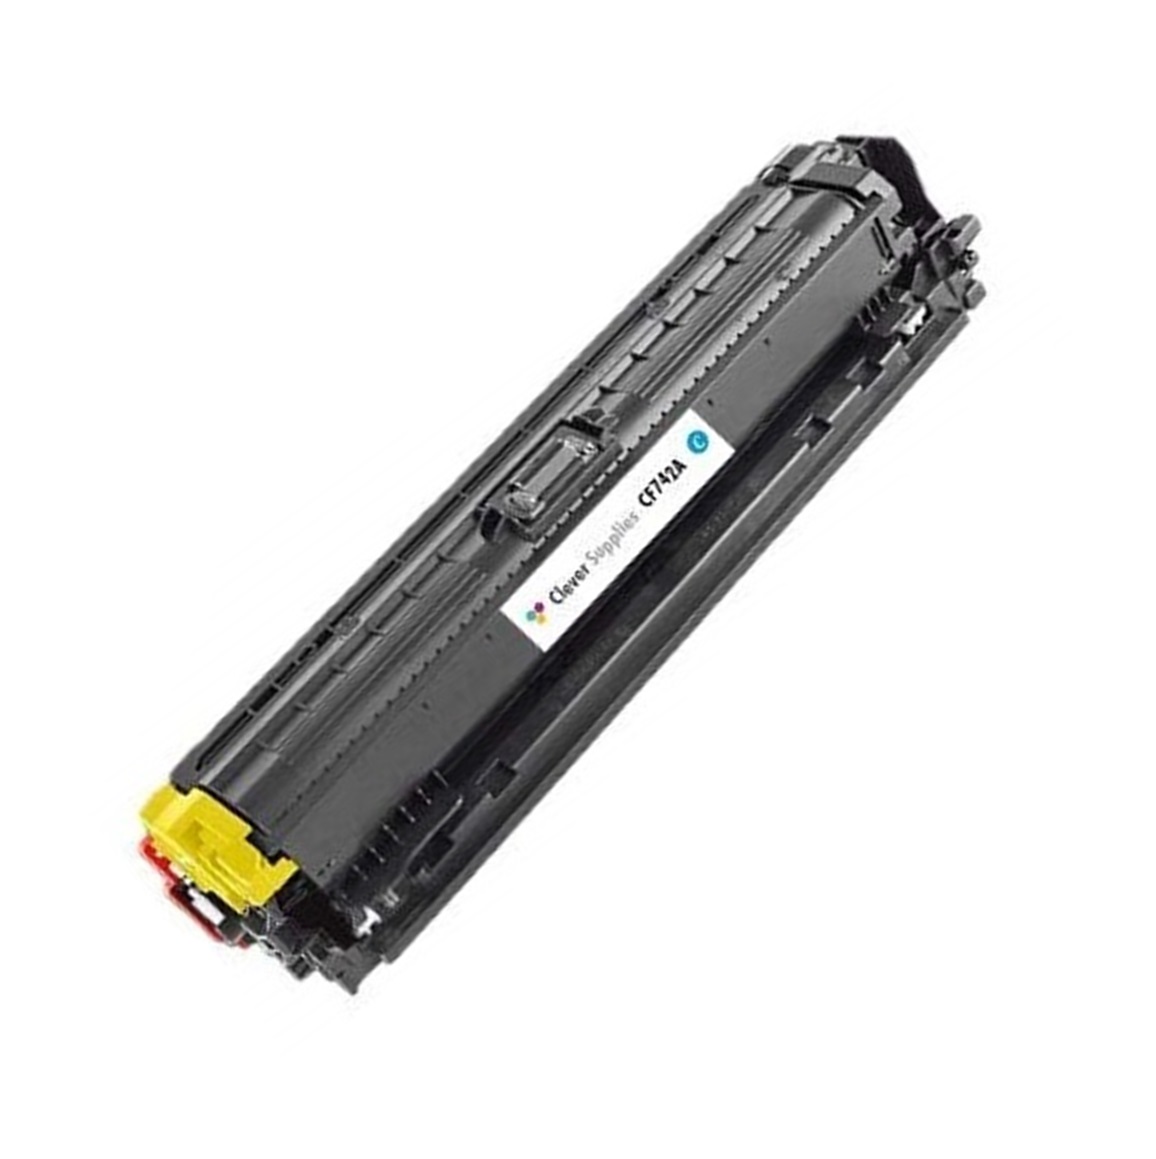 HP CE742A, 307A Yellow (7.3K) Compatible